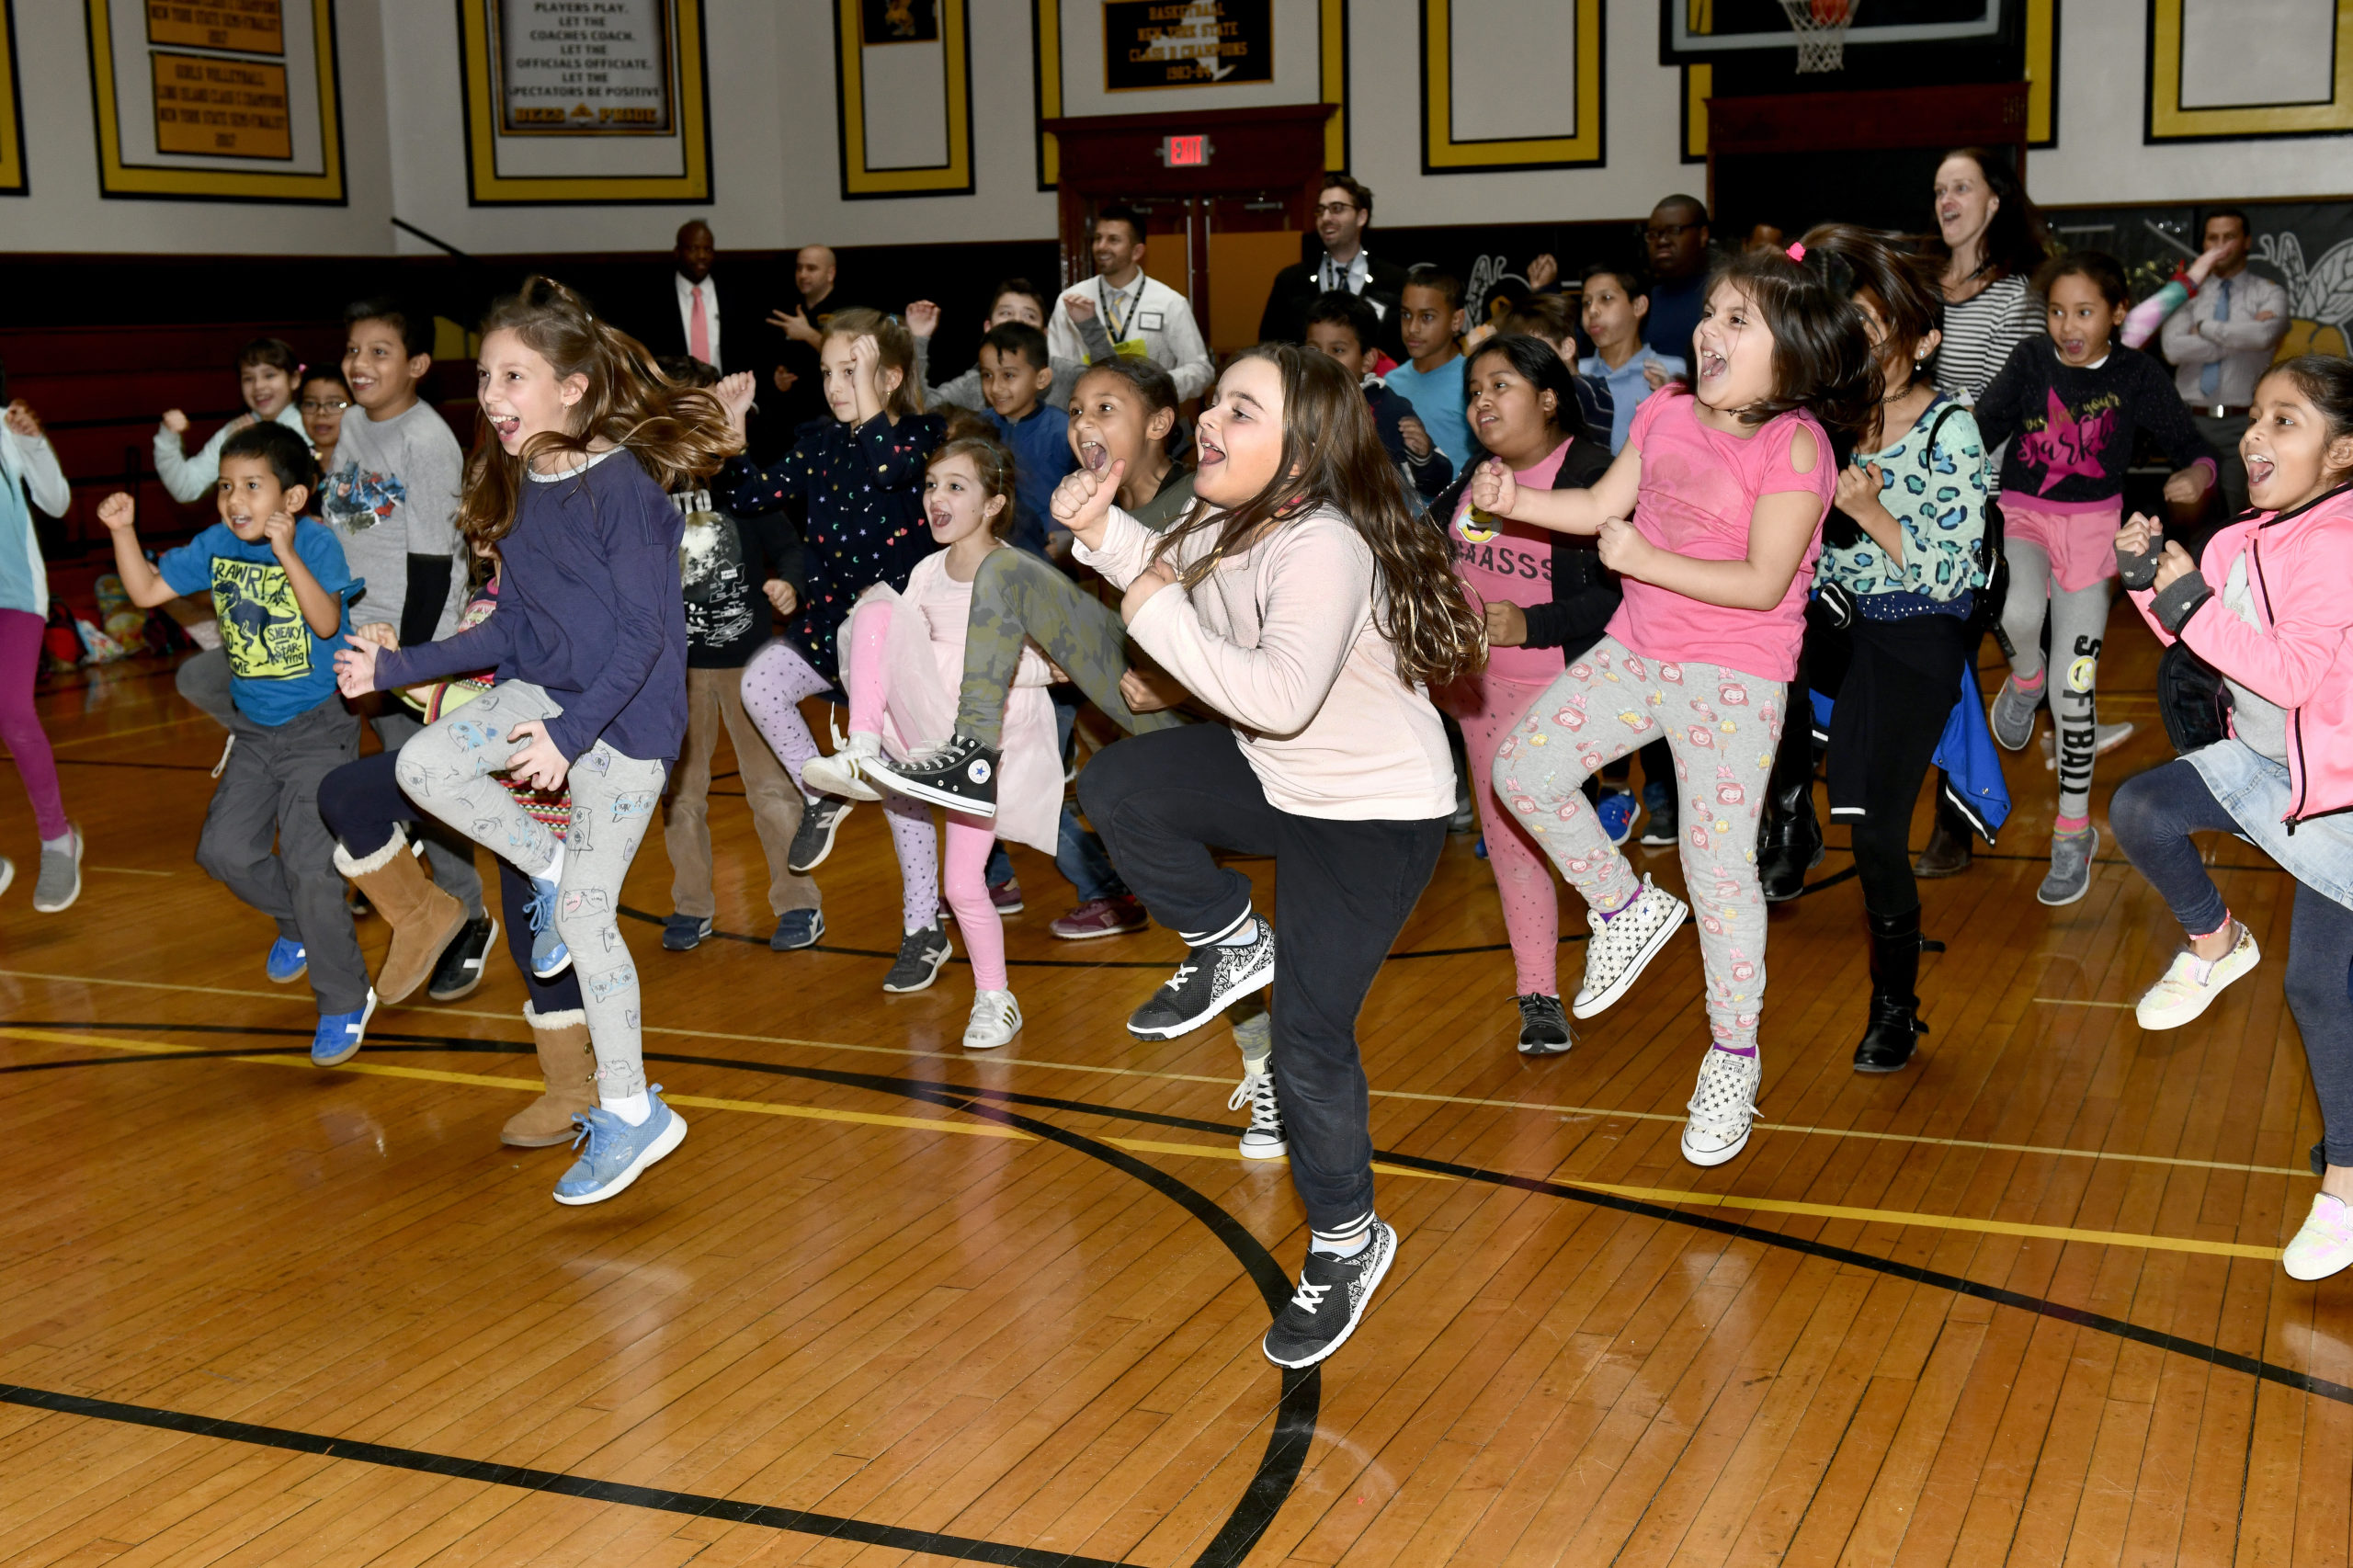 Dance Till You Drop!
January 24 -- The Bridgehampton School Elementary Student Council hosted a dance marathon on Friday in the school gym. The event was organized by fifth-grader and Student Council President, Sascha Gomberg.